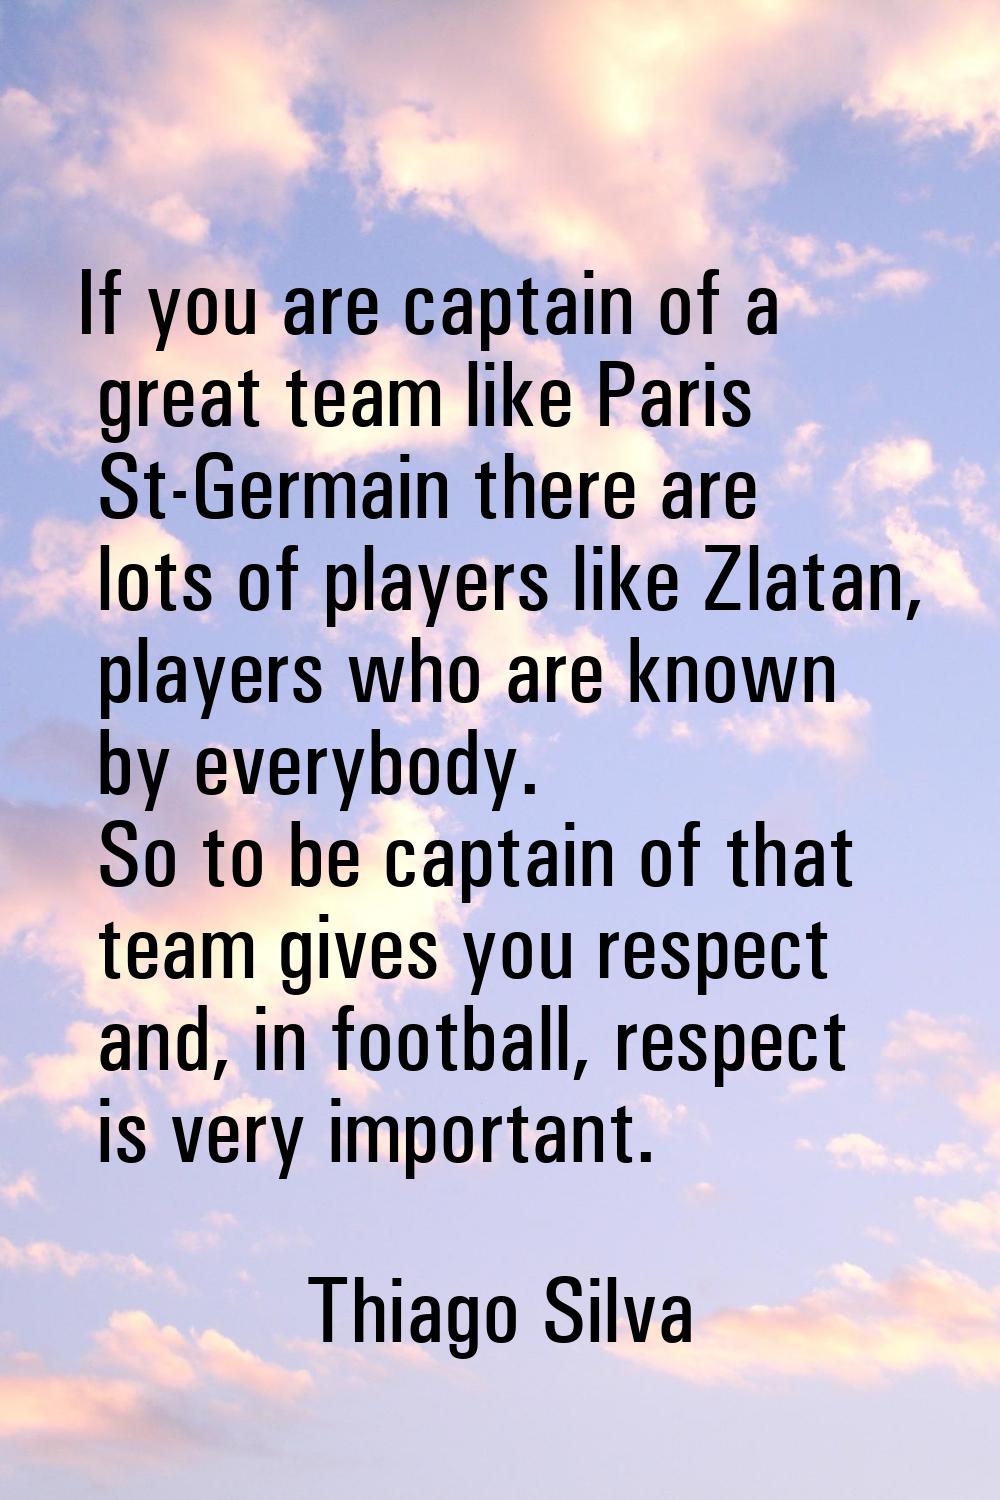 If you are captain of a great team like Paris St-Germain there are lots of players like Zlatan, pla